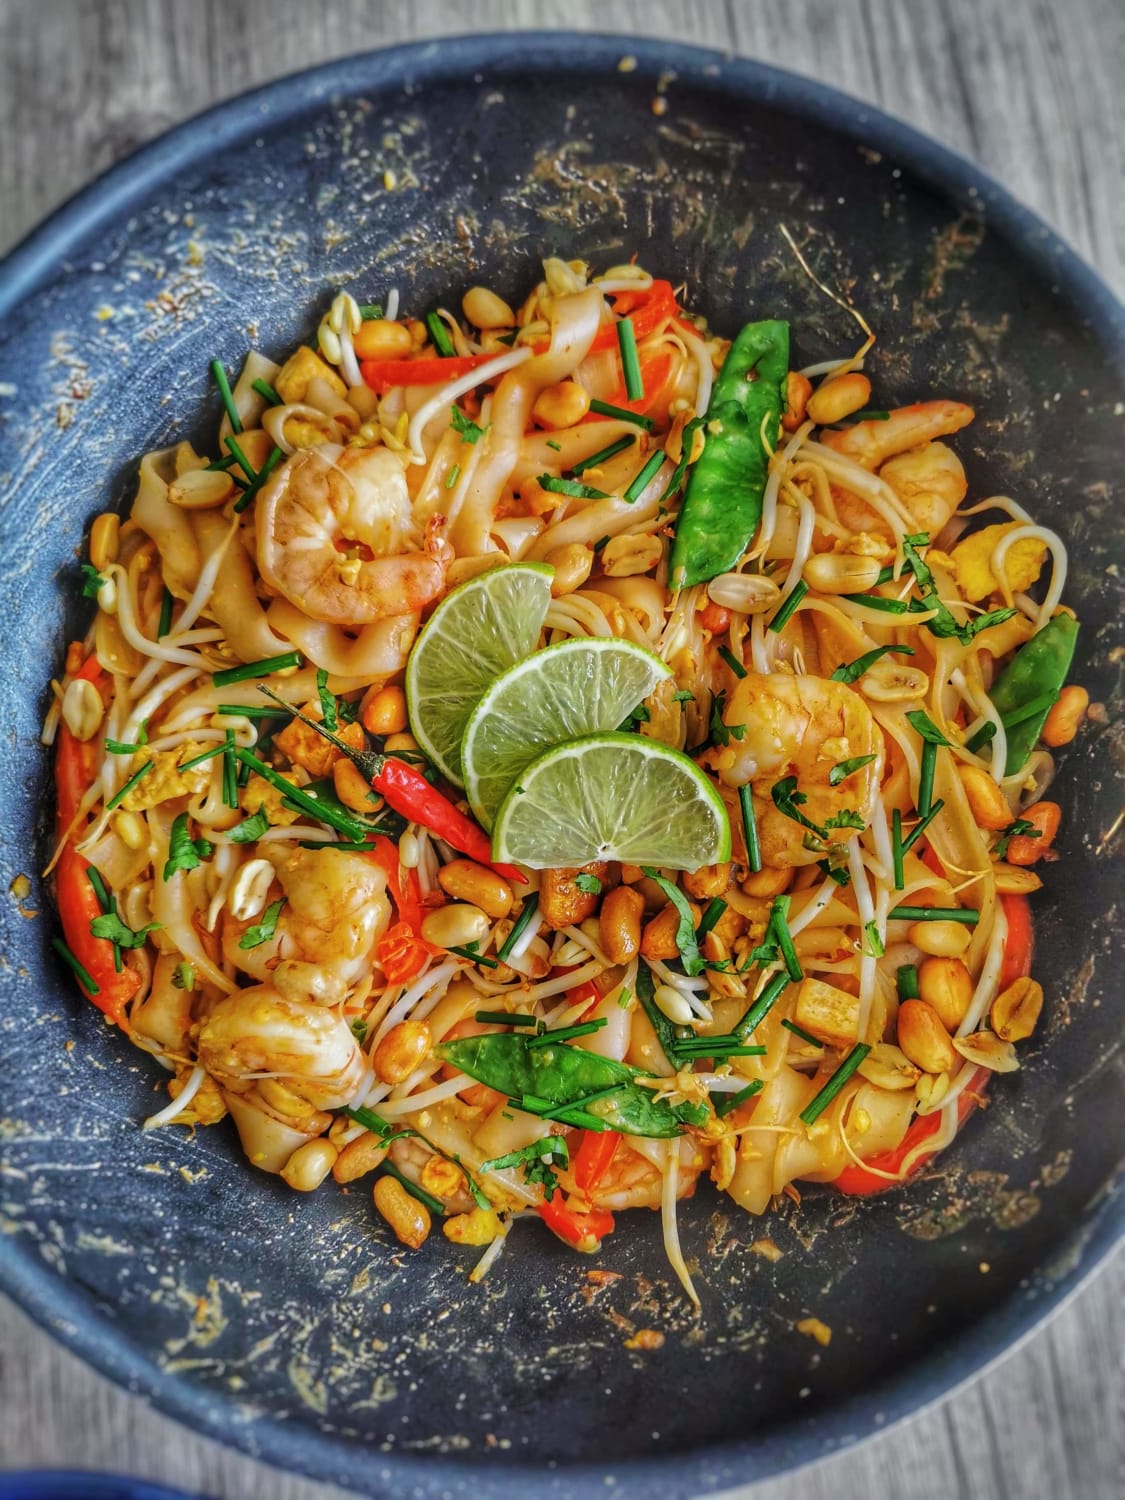 Been craving it nonstop, so I made some shrimp and fried tofu pad thai for lunch today!